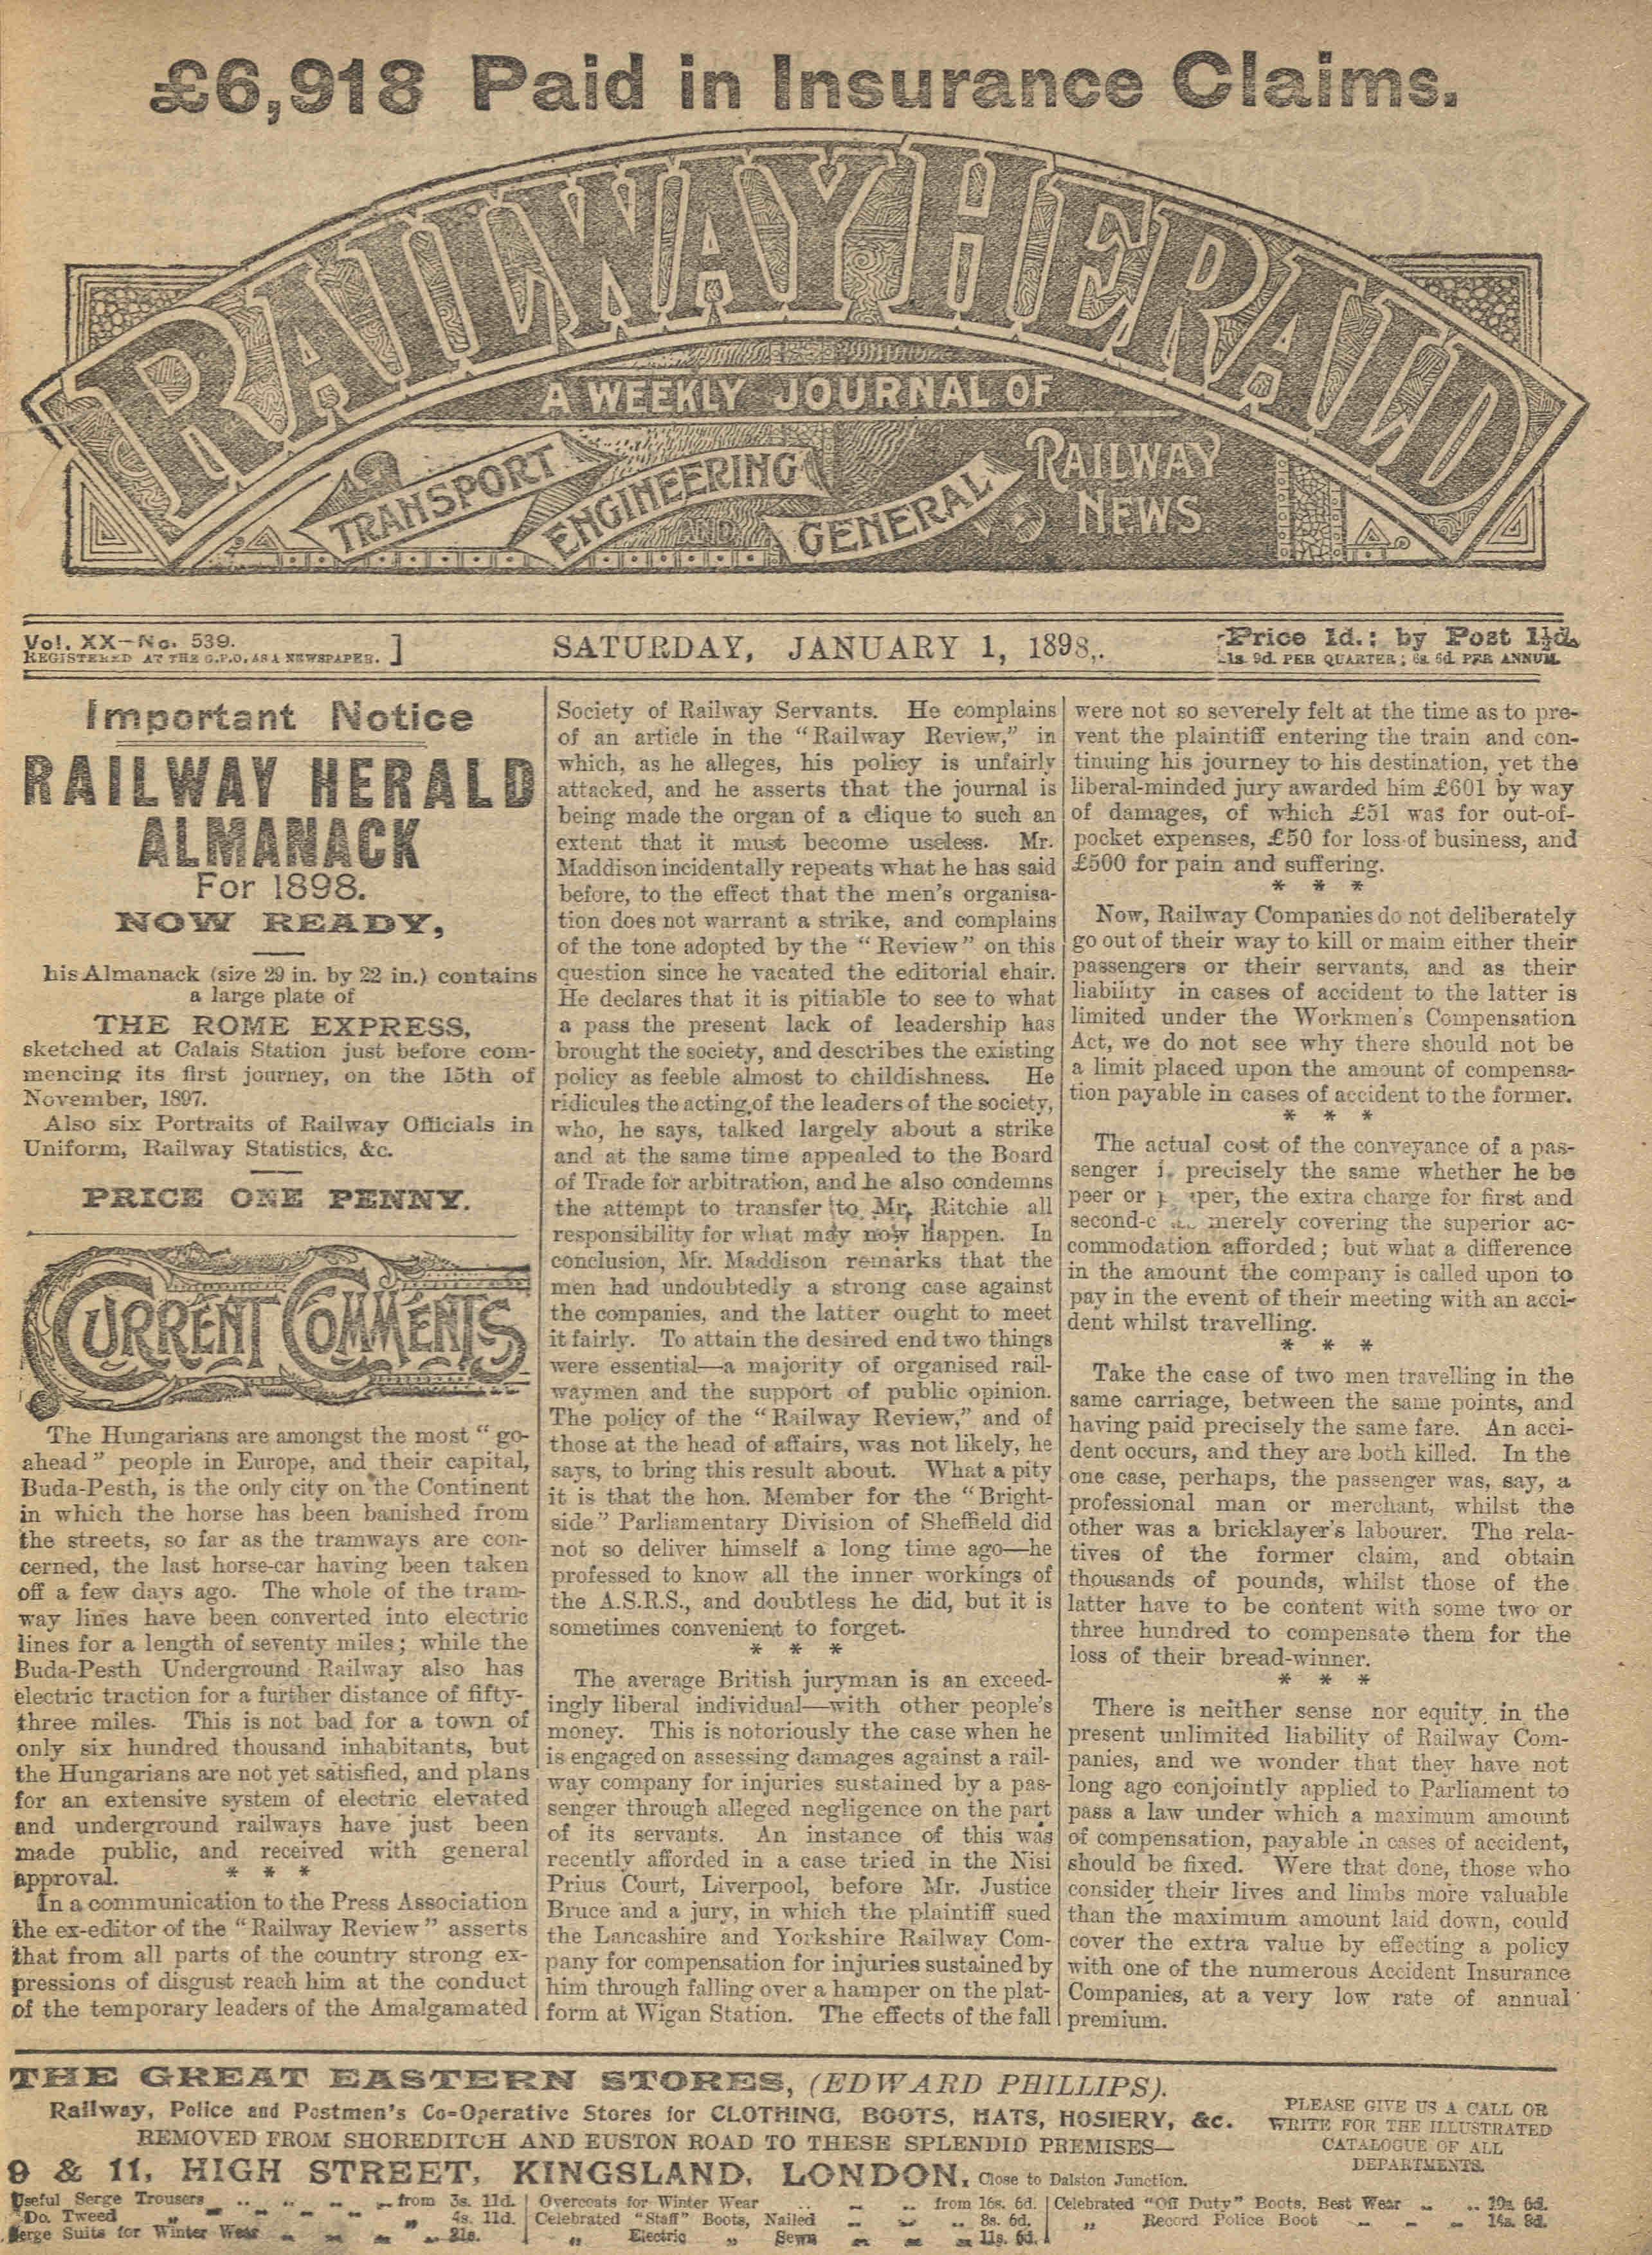 Front page of Railway Herald, 1 Jan 1898